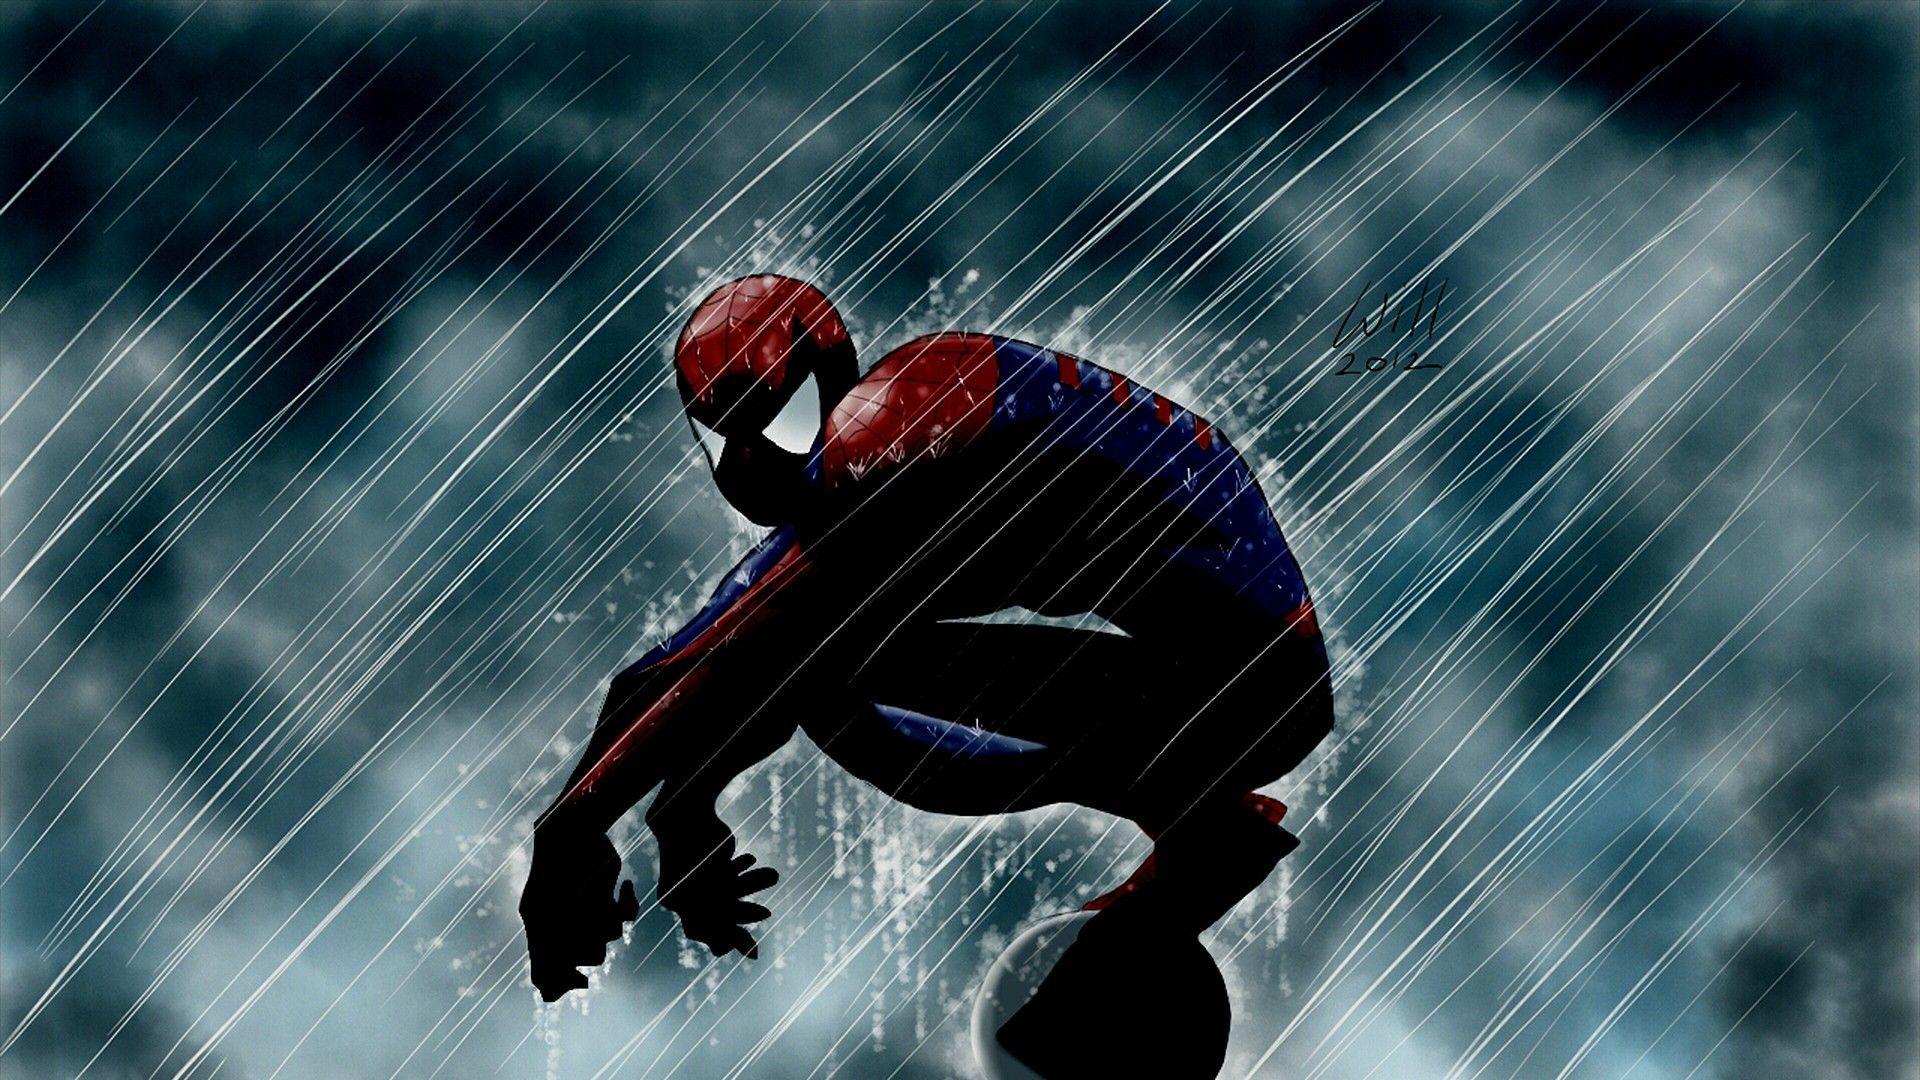 Cool Spider-Man Wallpapers - Wallpaper Cave